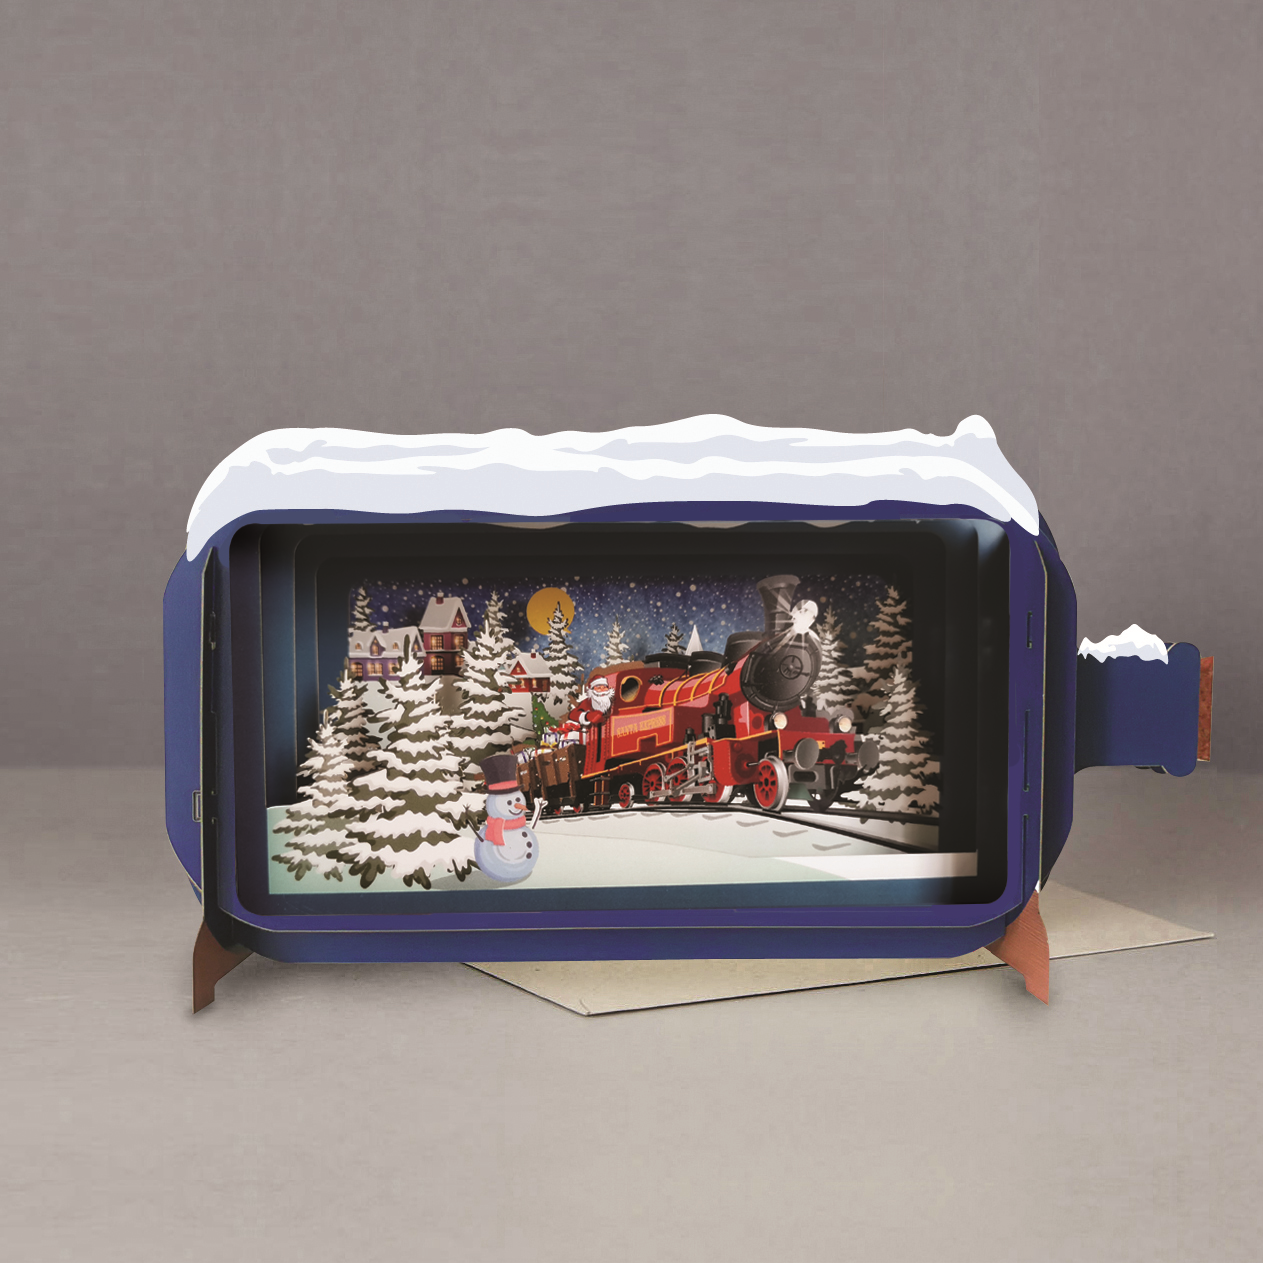 Message In A Bottle Santa Express Pop Up Christmas Greeting Card